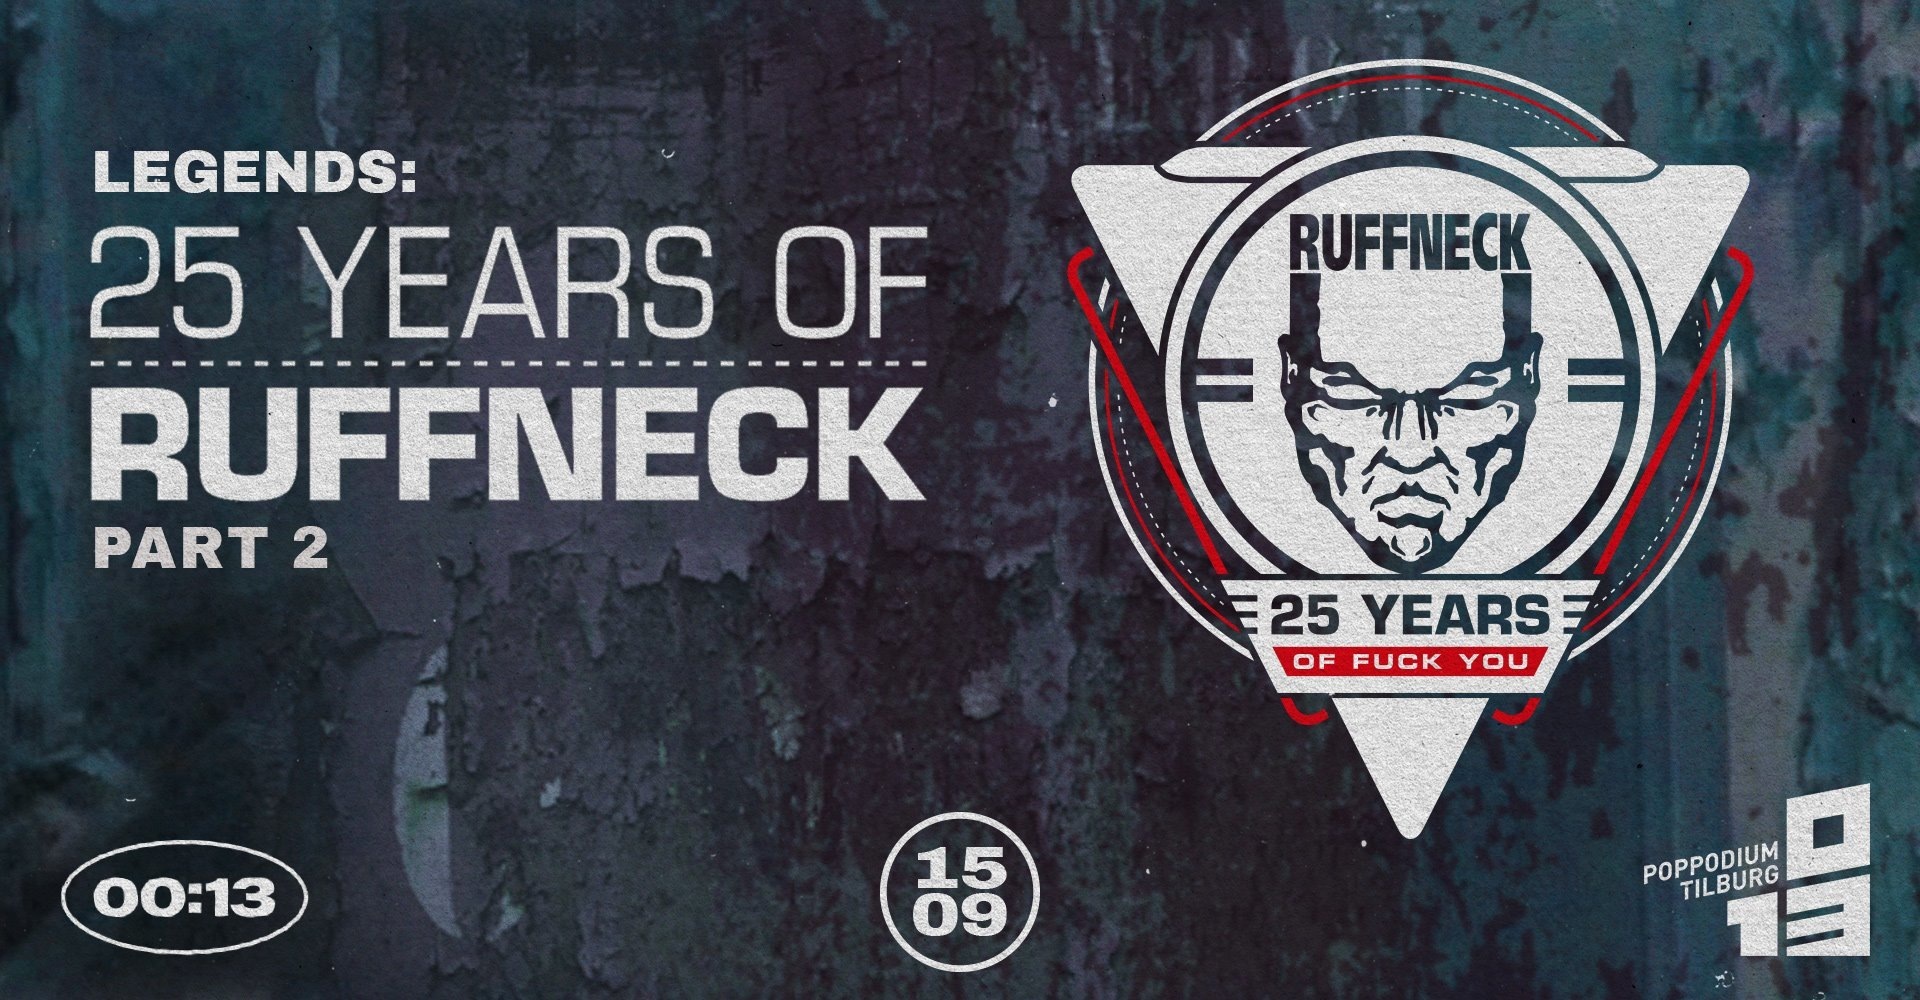 2018-09-15-legends-25-years-of-ruffneck-013-event